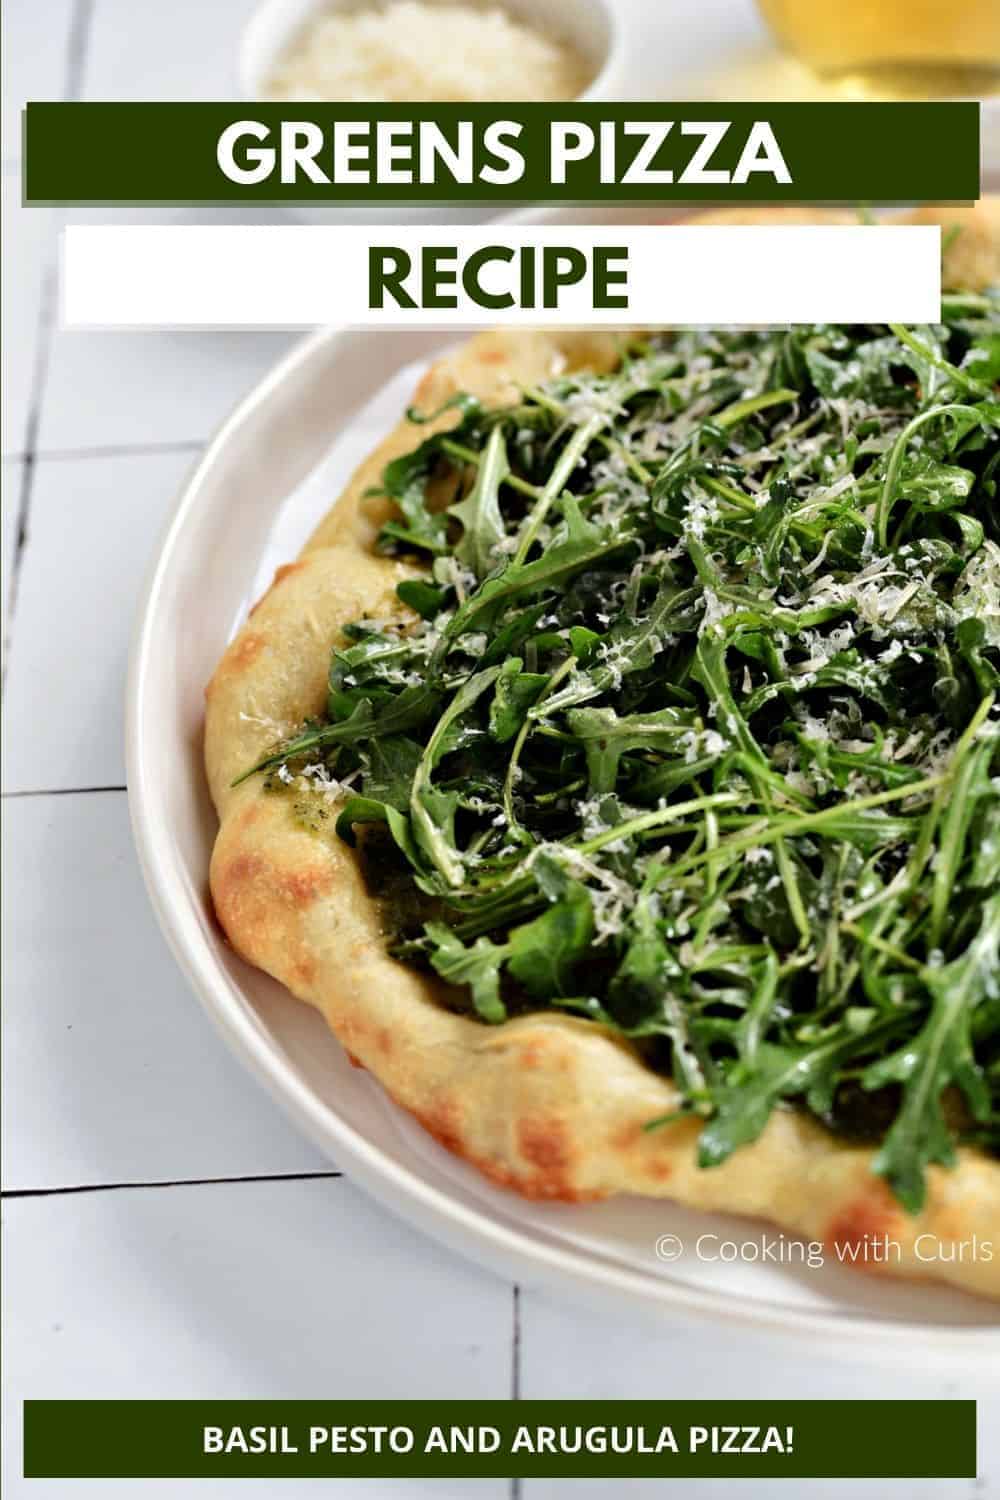 Pizza topped with with arugula greens and grated parmesan with title graphic across the top.